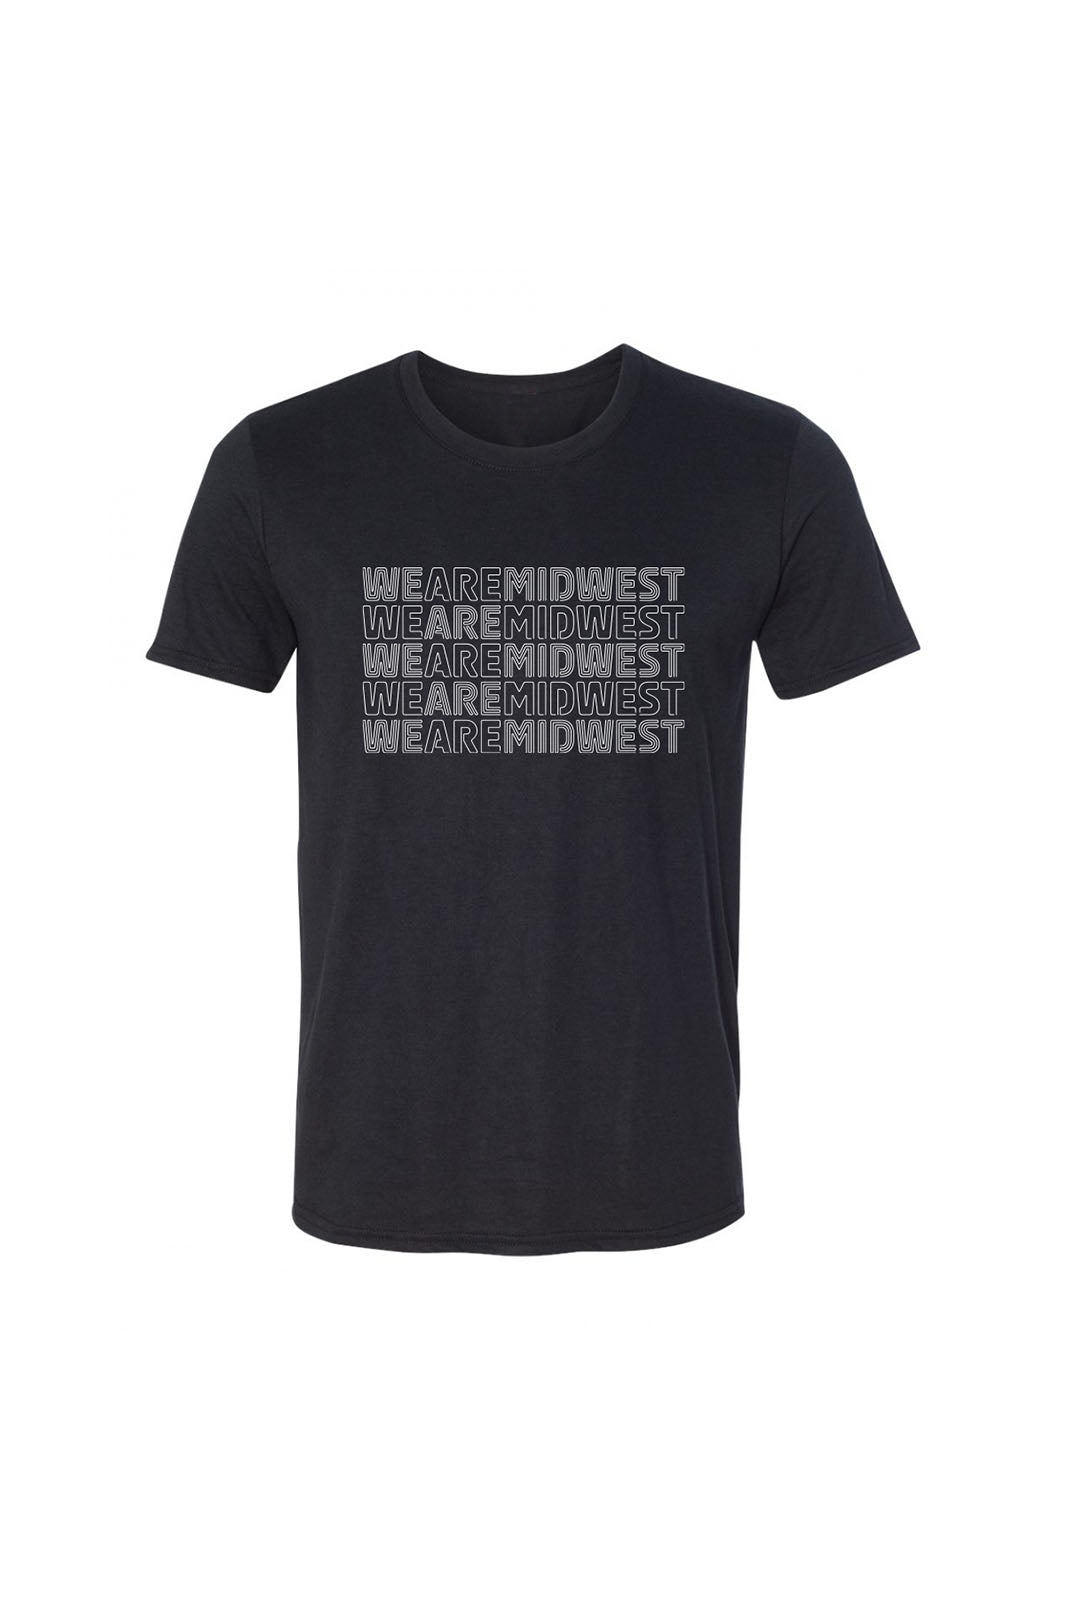 We Are Midwest T-Shirt - Black